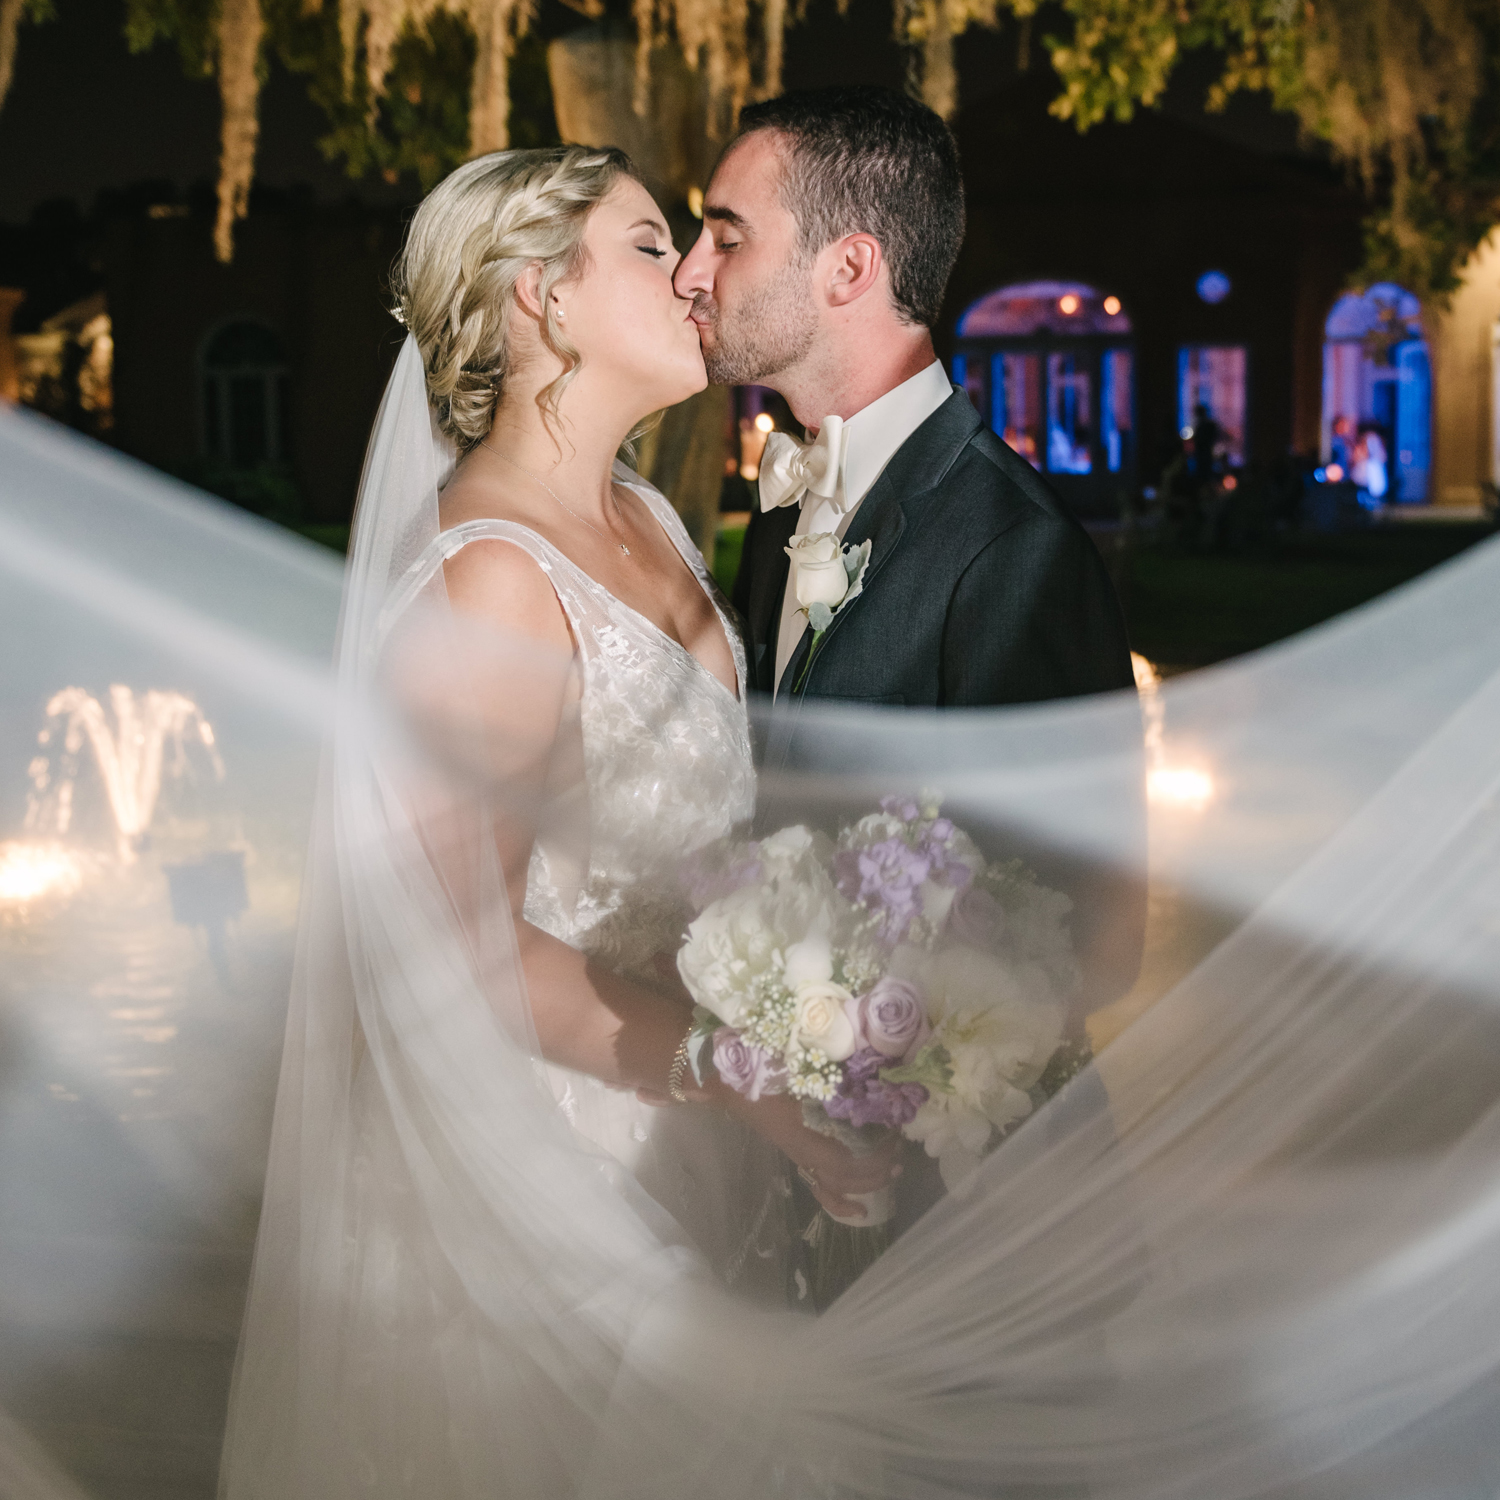 Holy Name of Jesus Pavilion of Two Sisters Wedding Photographer | Michelle & Steven